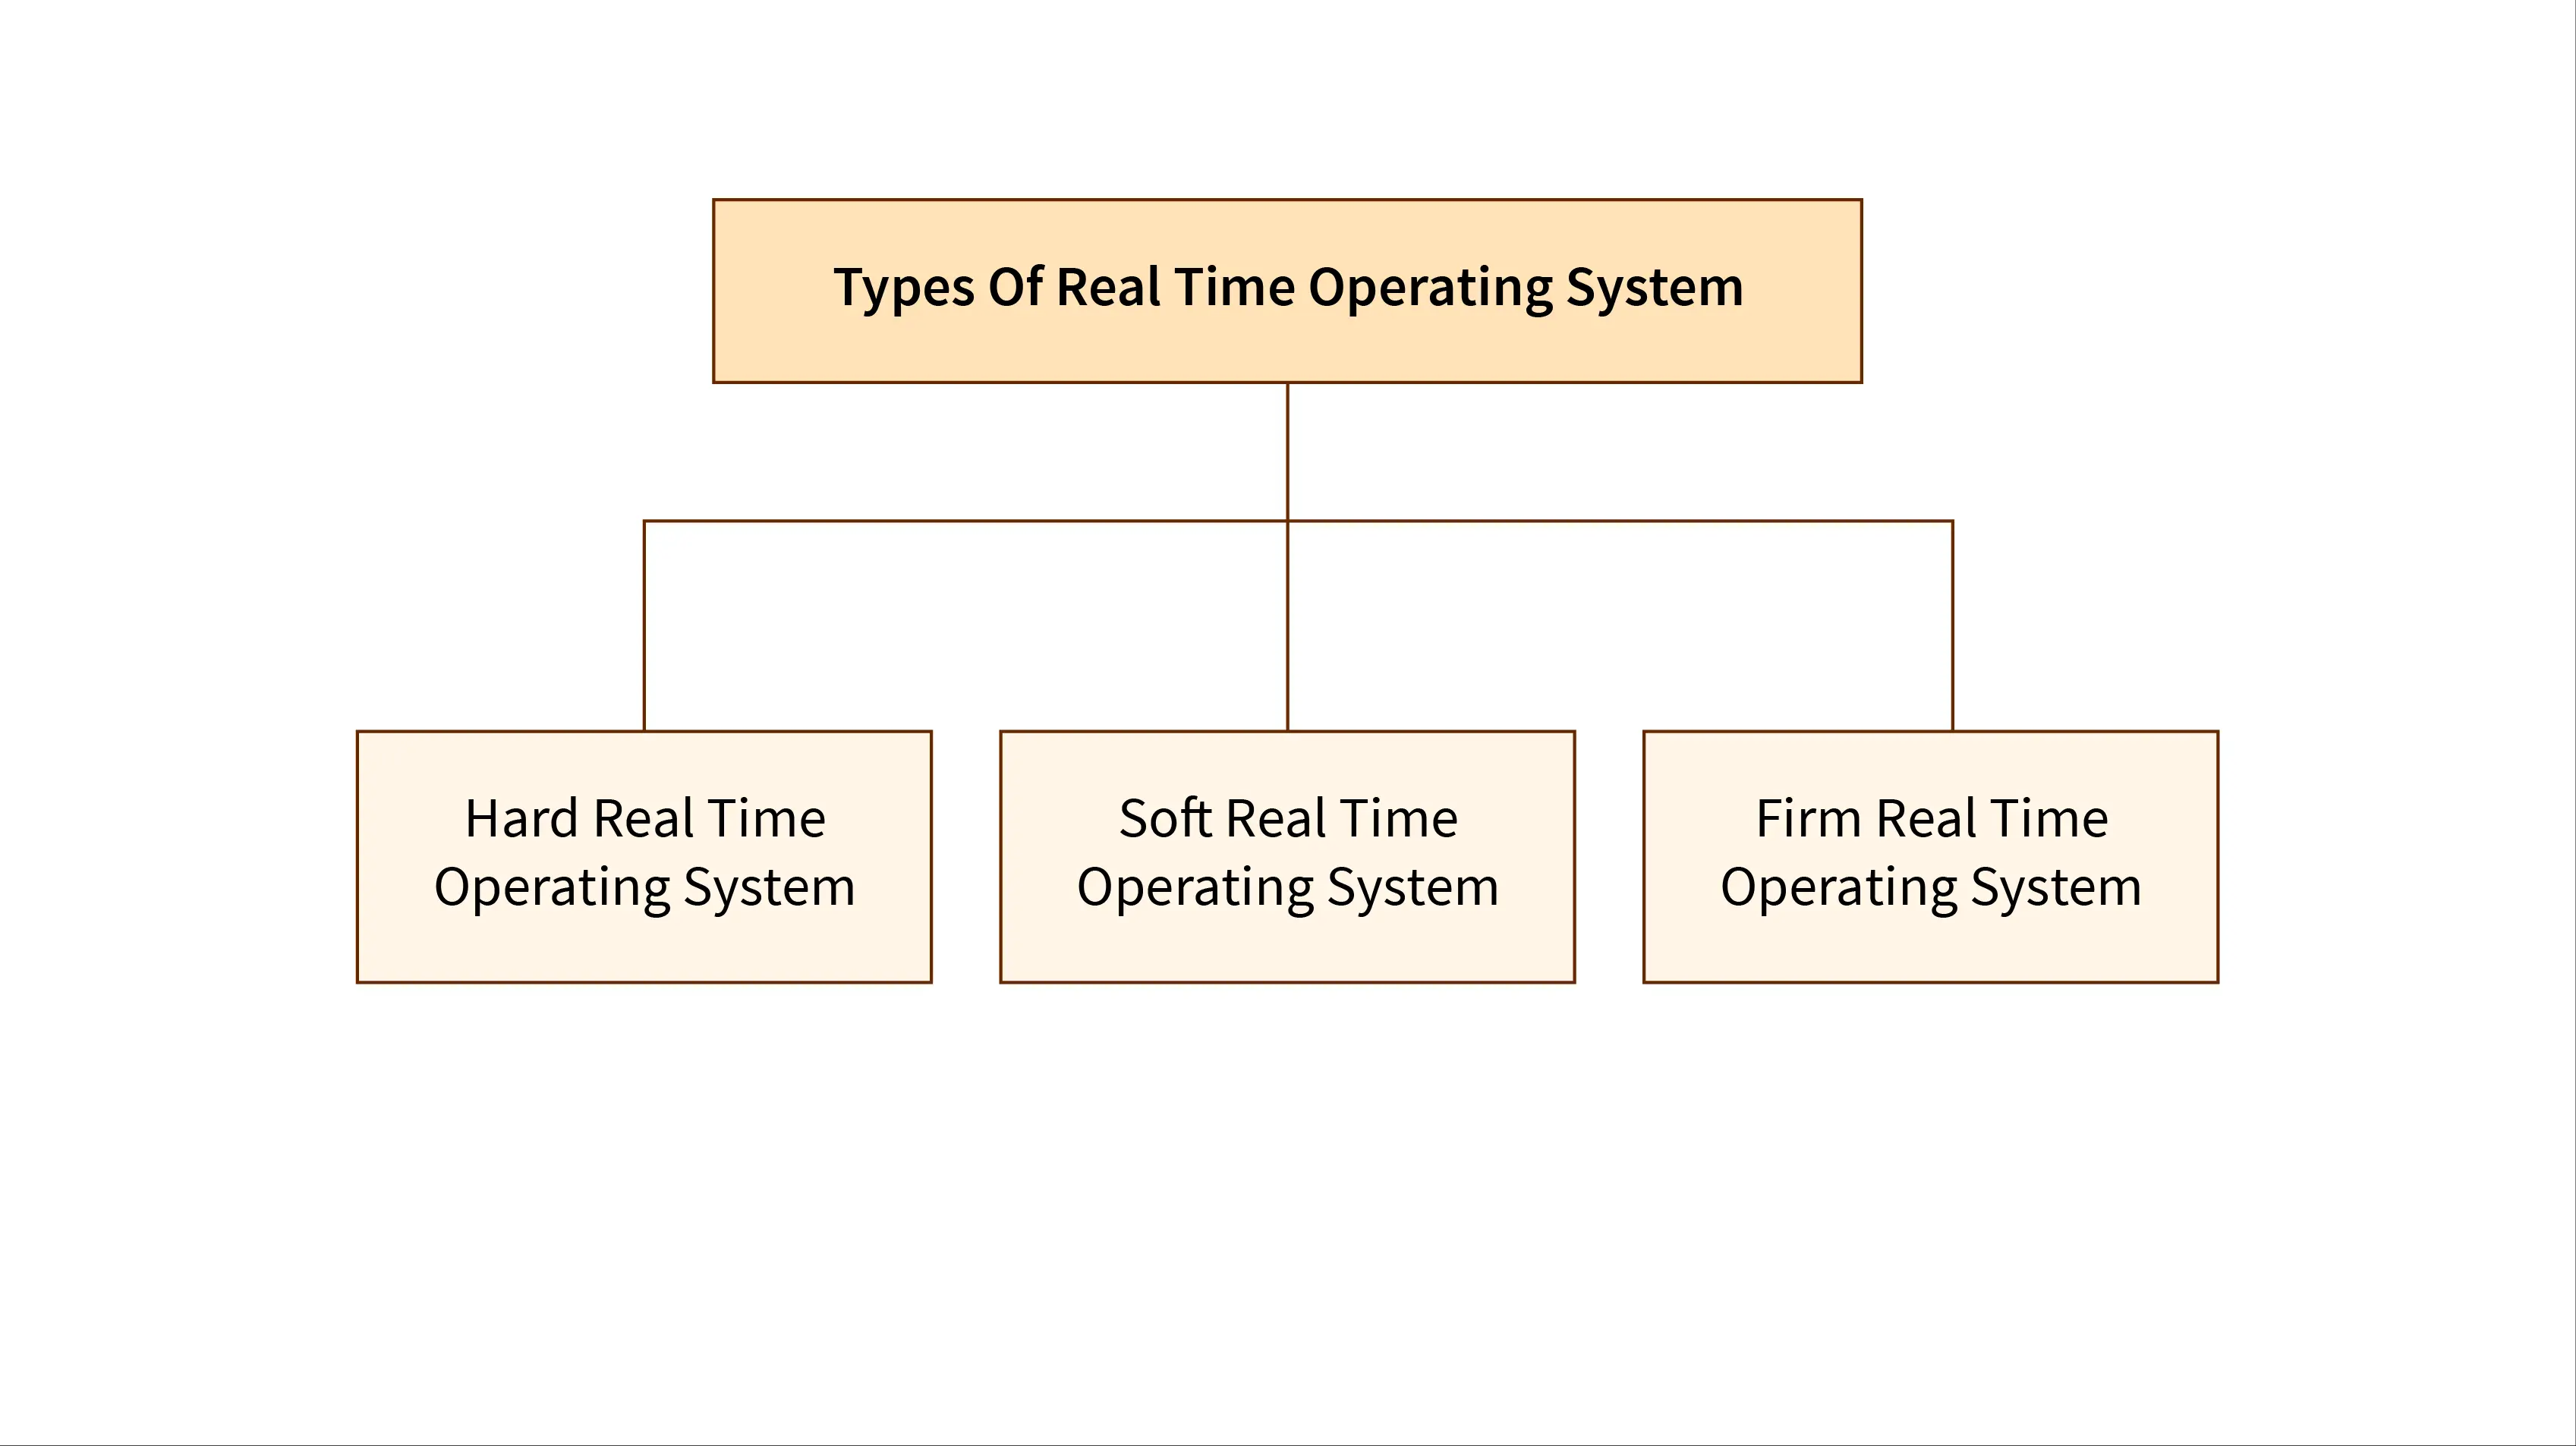 Types of Real-Time Operating Systems